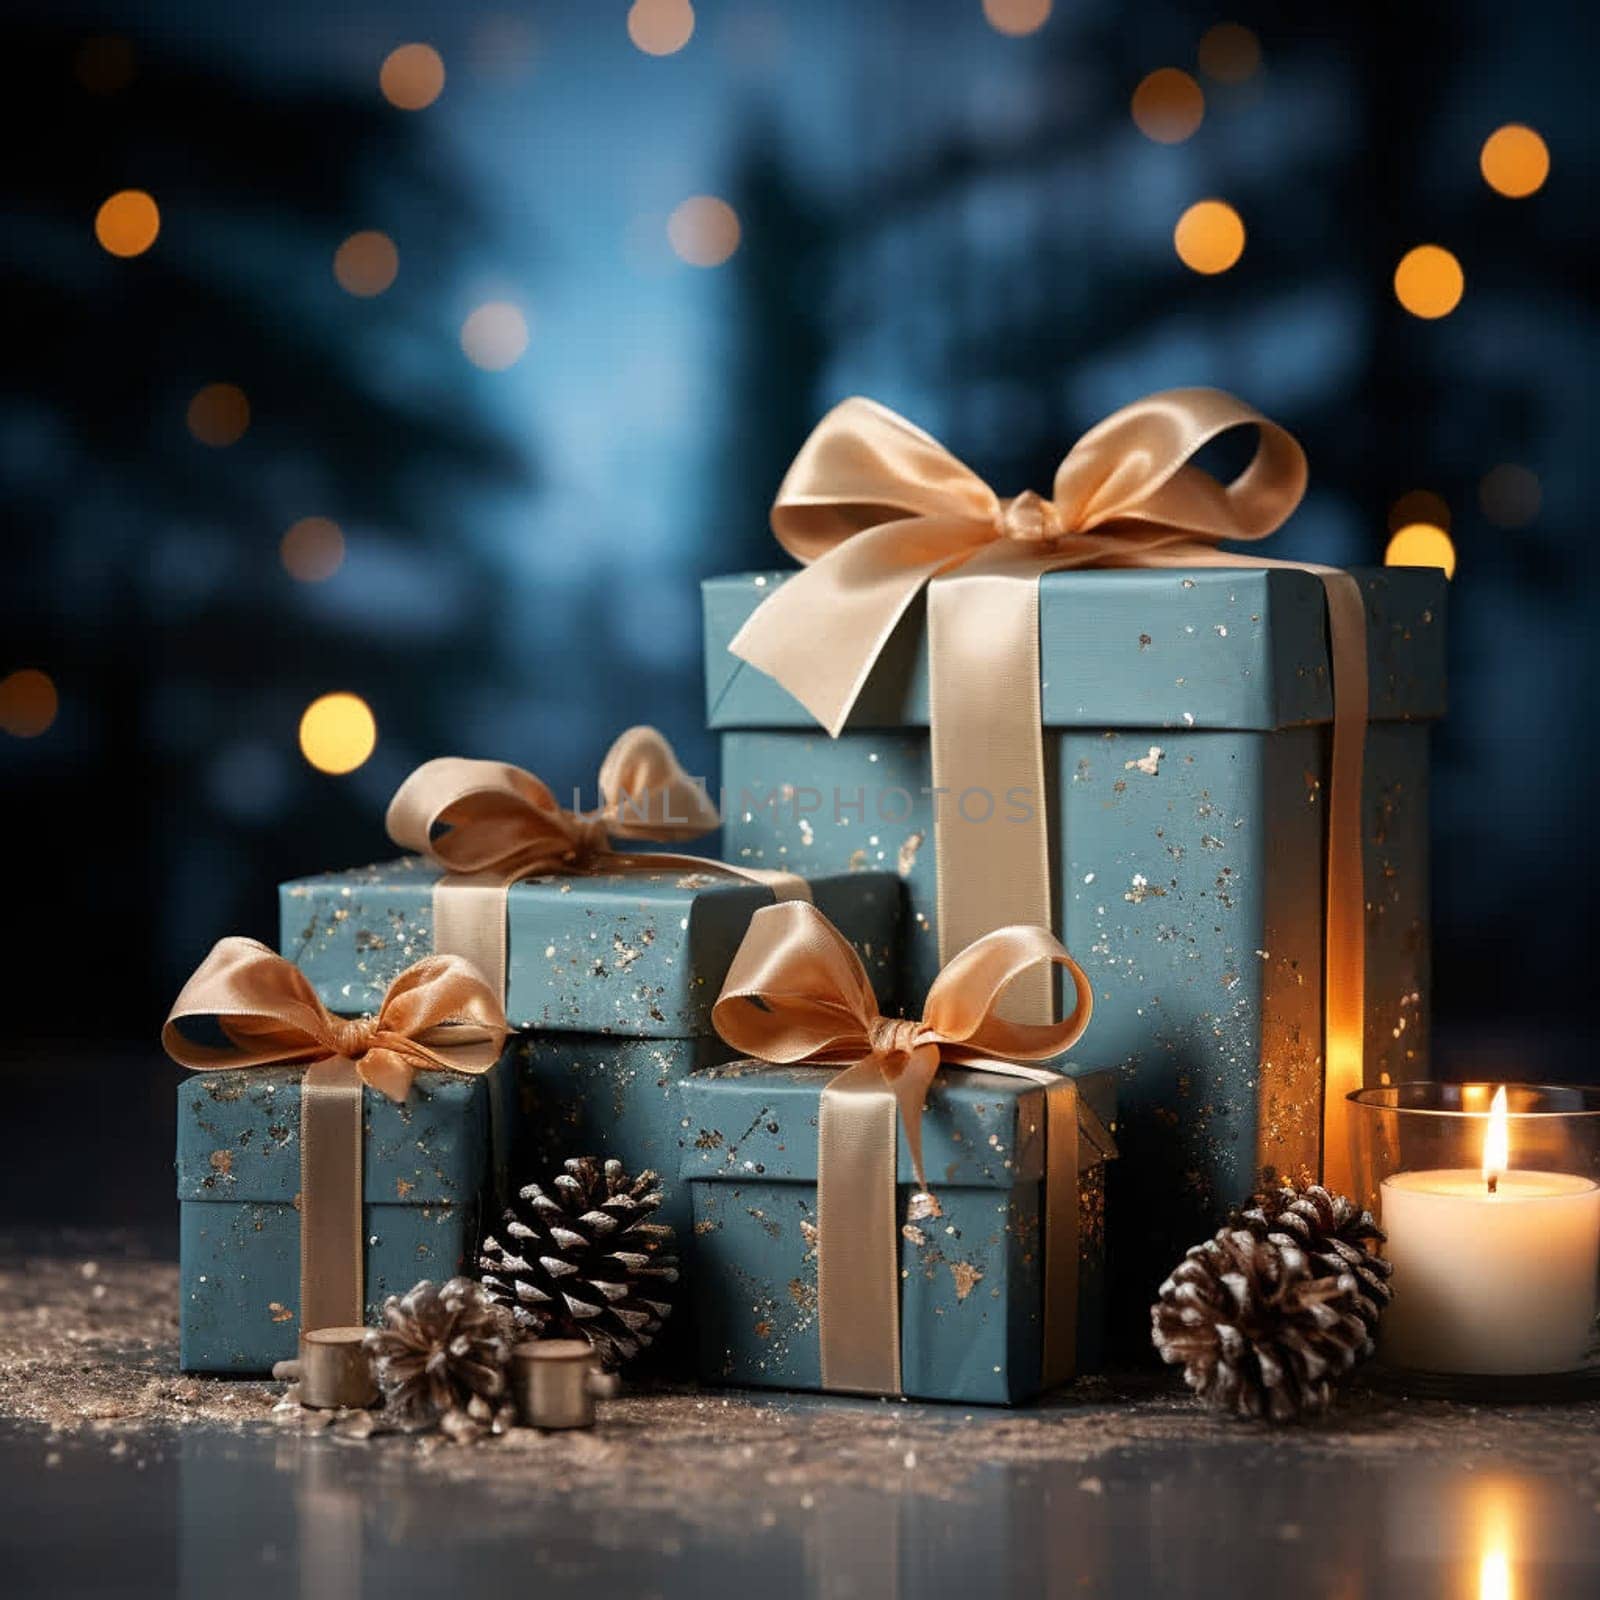 Christmas gifts are decorated in blue and gold. High quality photo